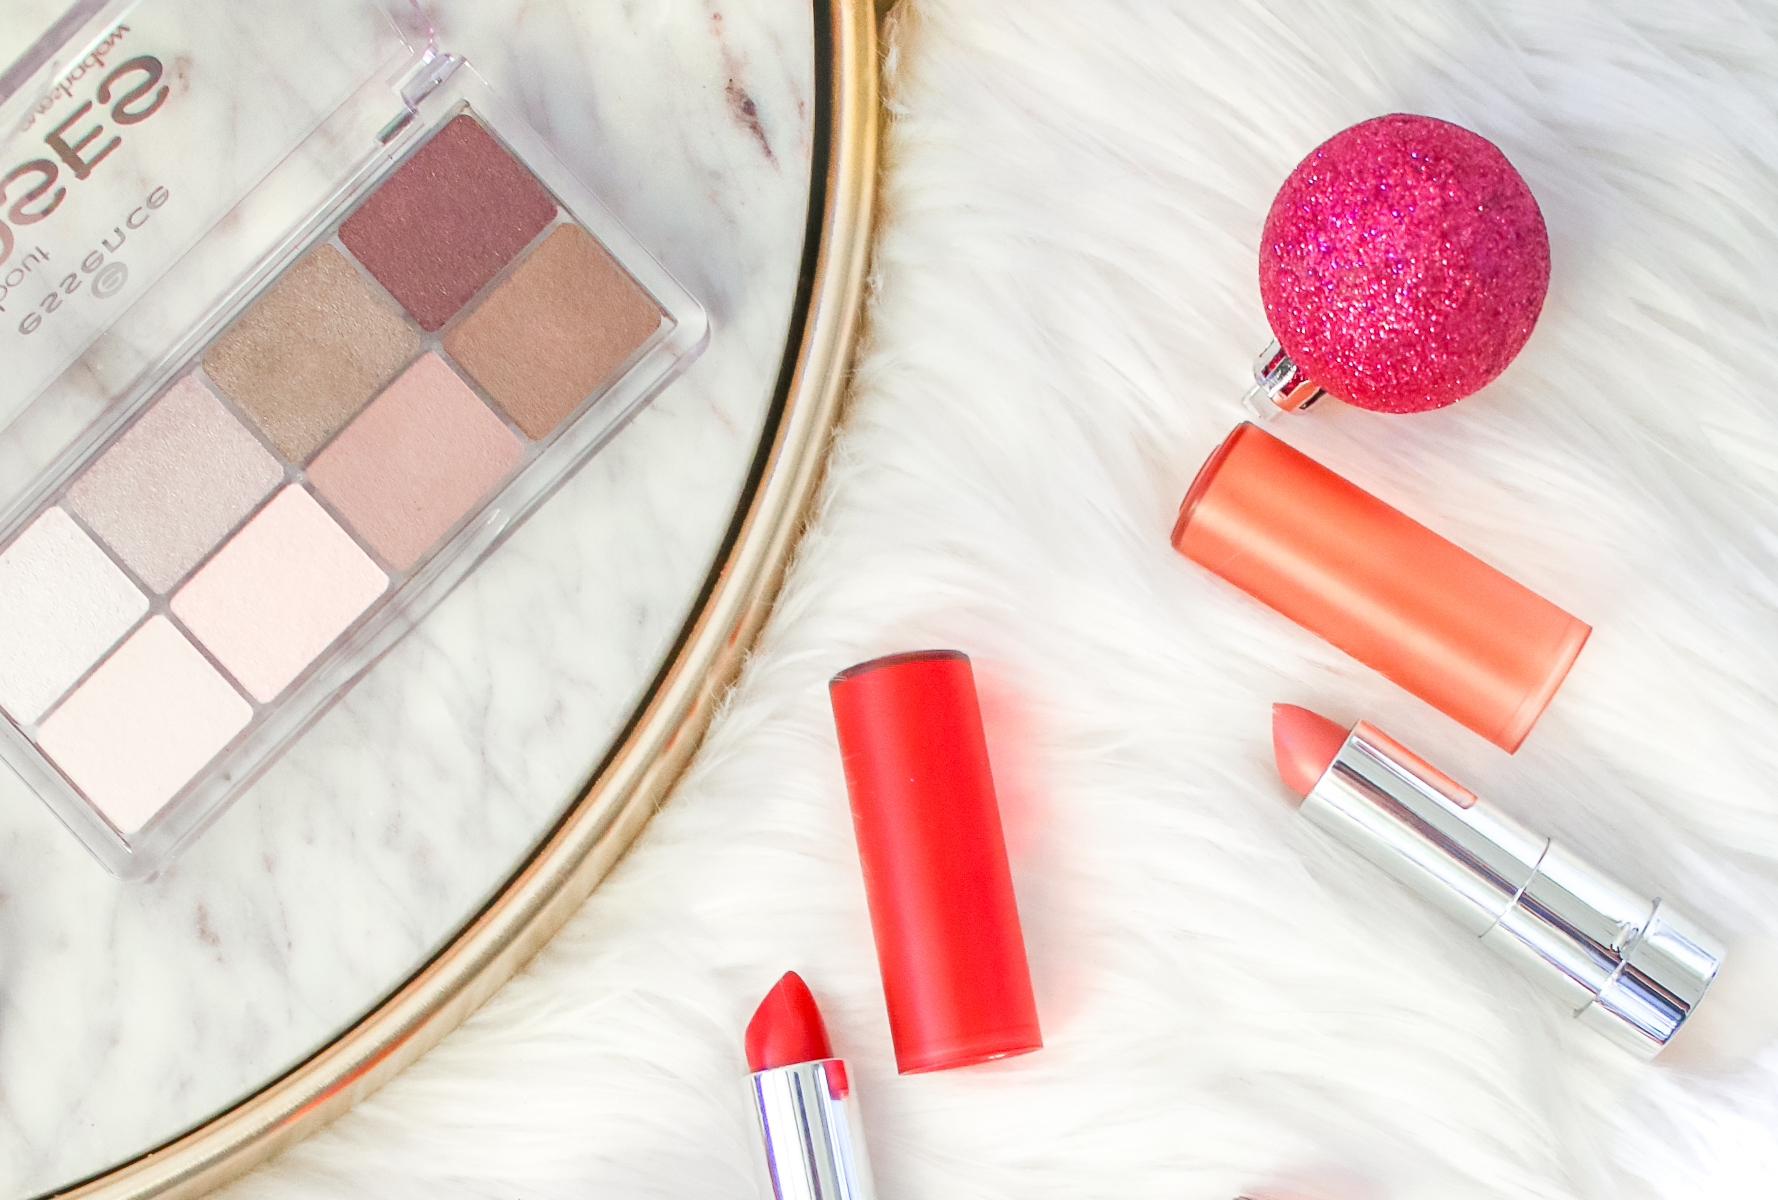 The best affordable but good quality makeup from essence cosmetics (including the best lipstick under $5) by southern fashion blogger Stephanie Ziajka from Diary of a Debutante